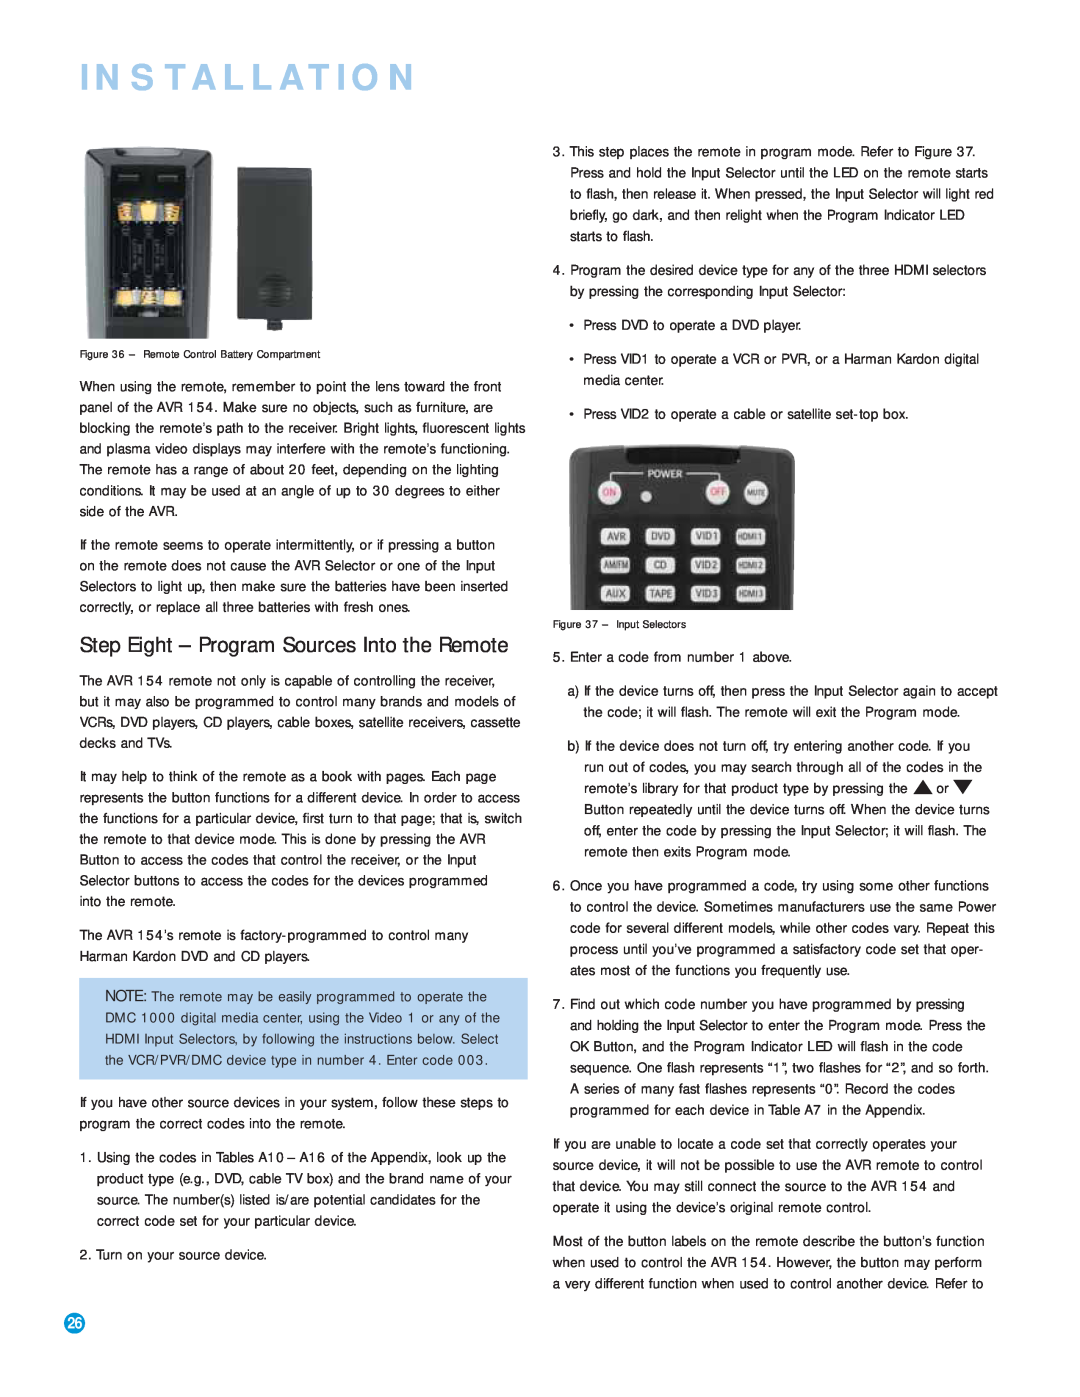 Harman-Kardon AVR 154 owner manual Step Eight - Program Sources Into the Remote, Installation, Turn on your source device 